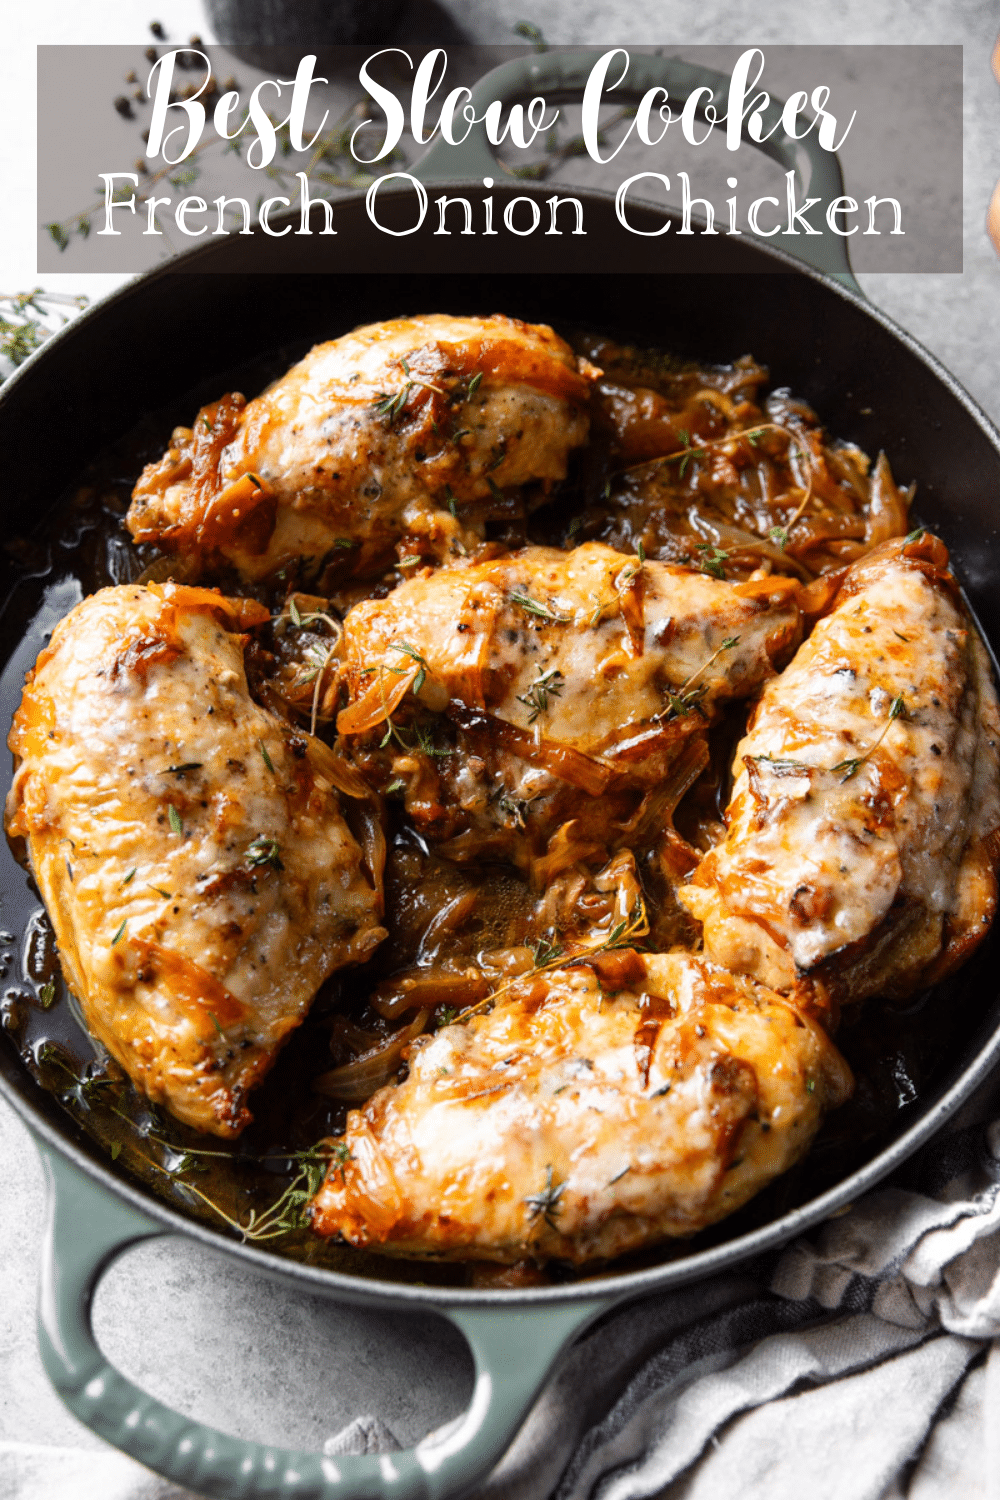 Slow cooked French onion chicken in a dutch oven